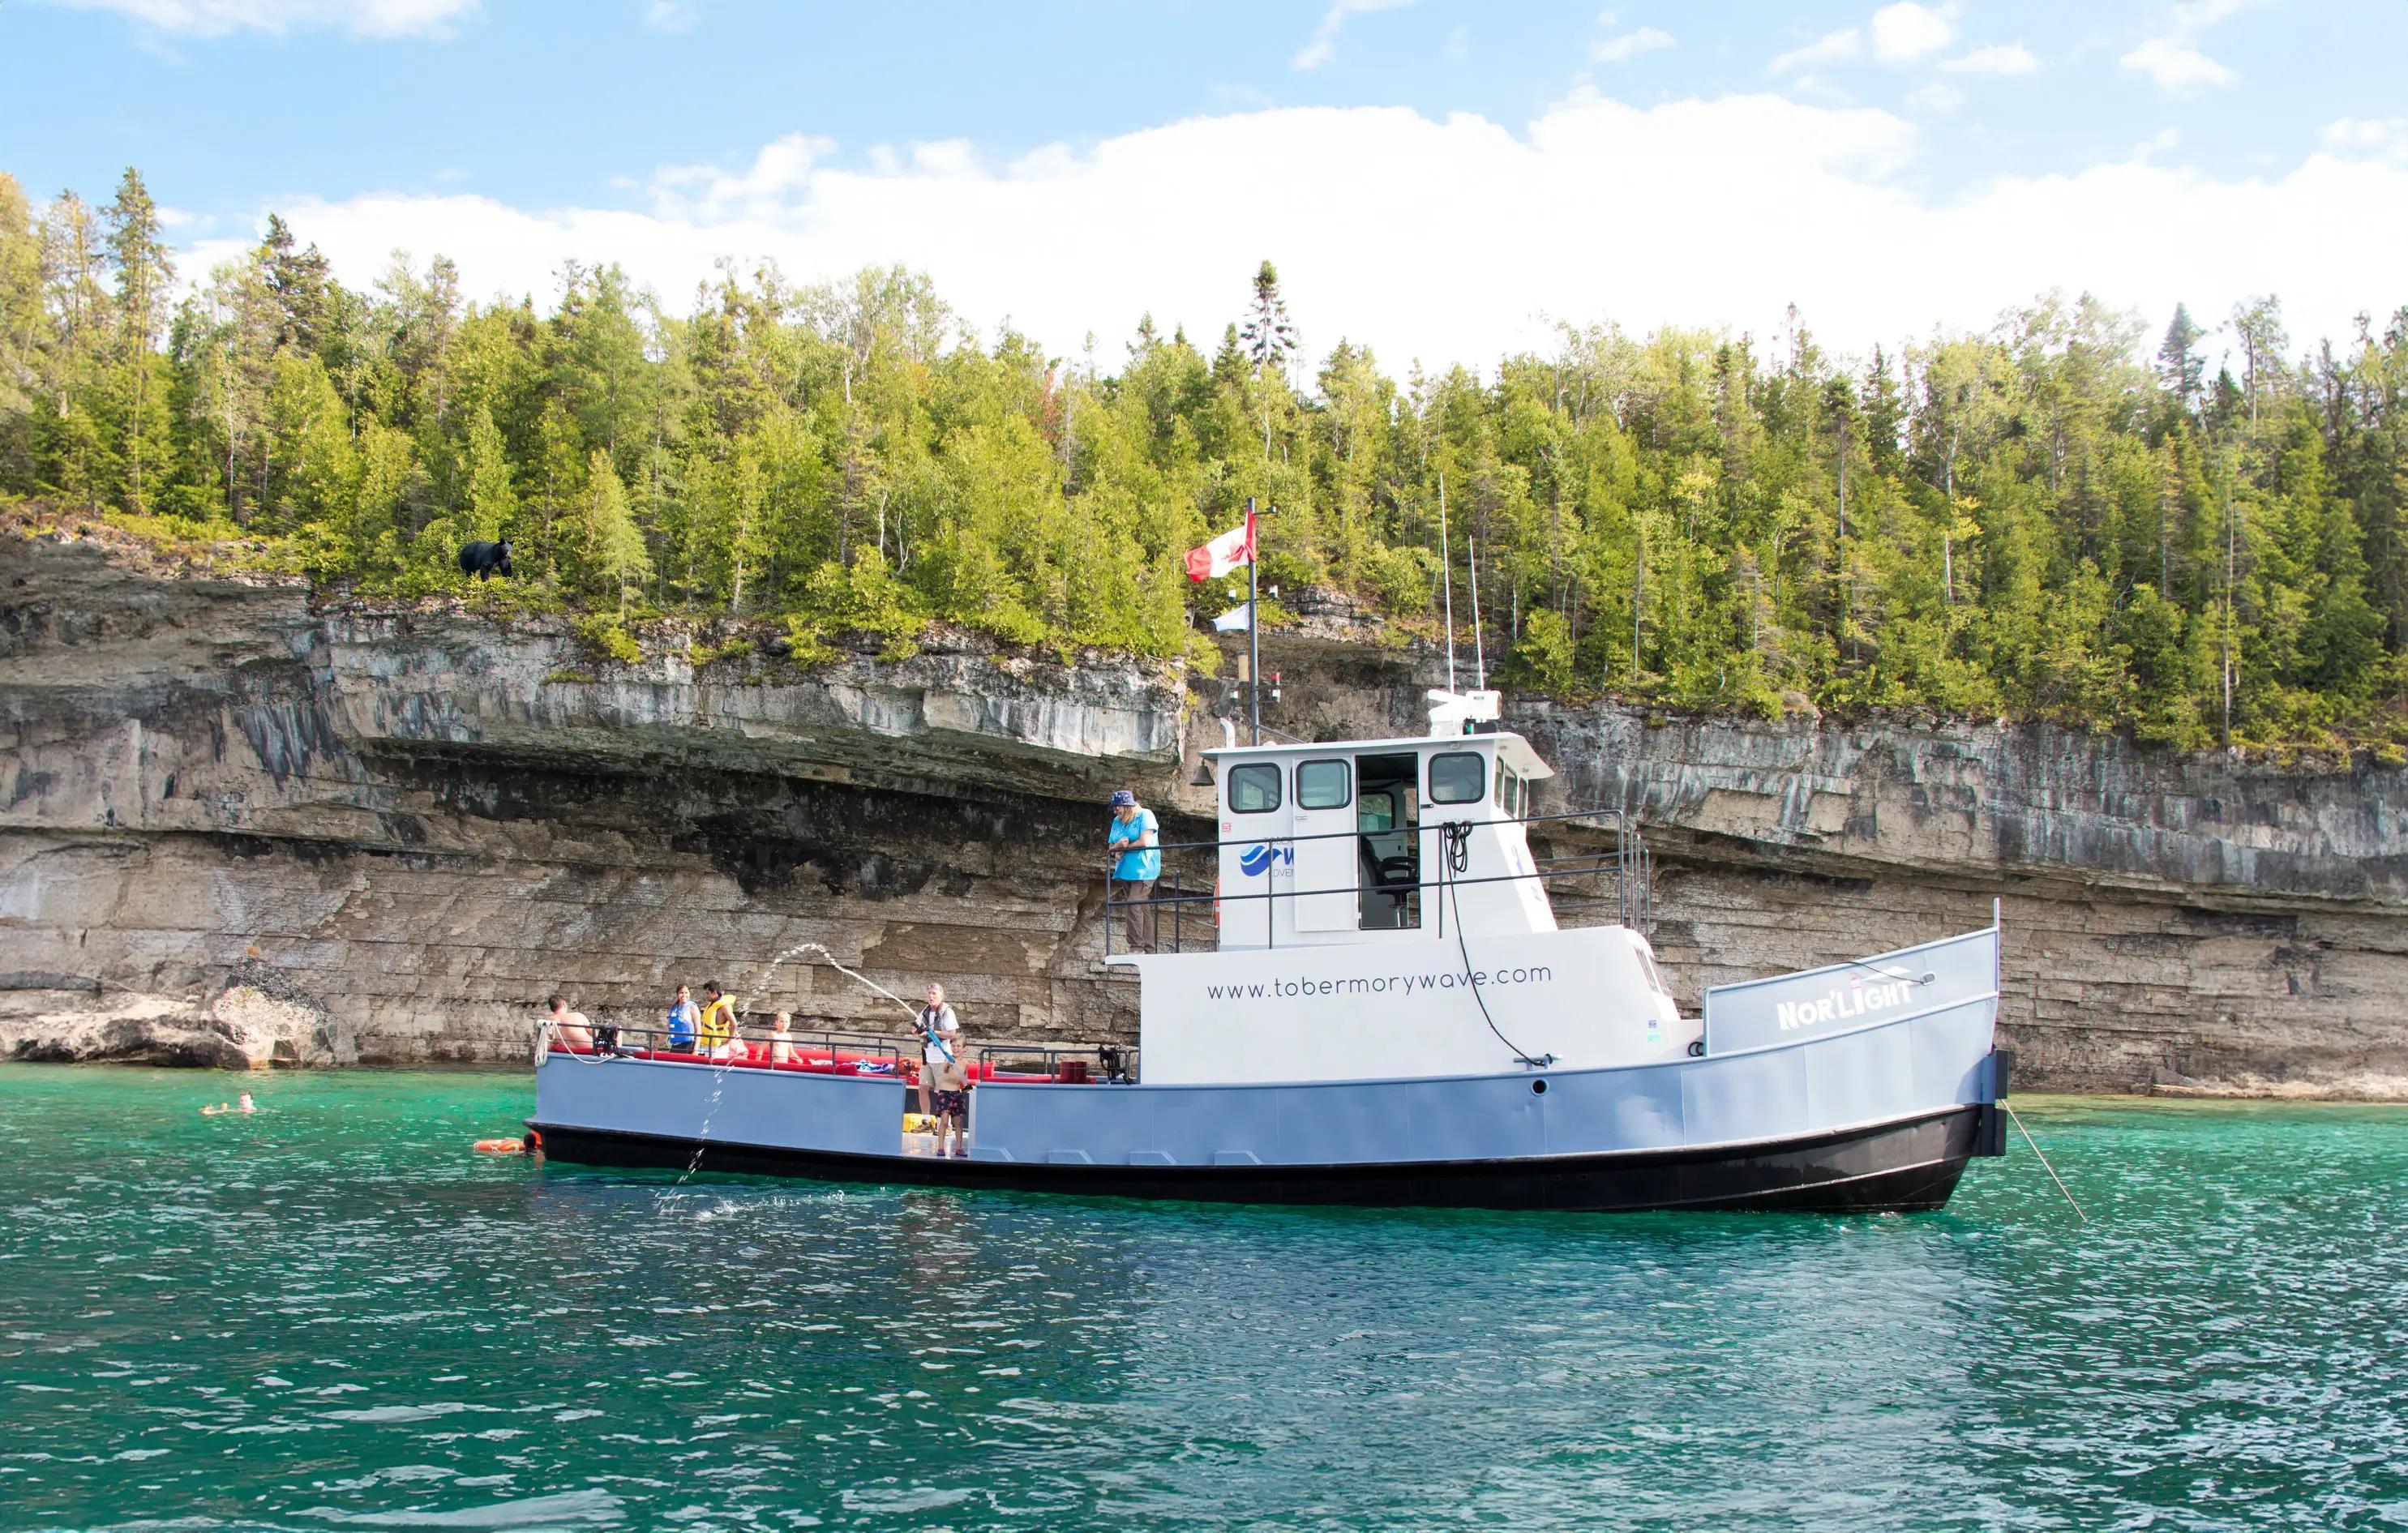 A classic-style tugboat anchored in front of a cliff, surrounded by clear water with people swimming around the boat.